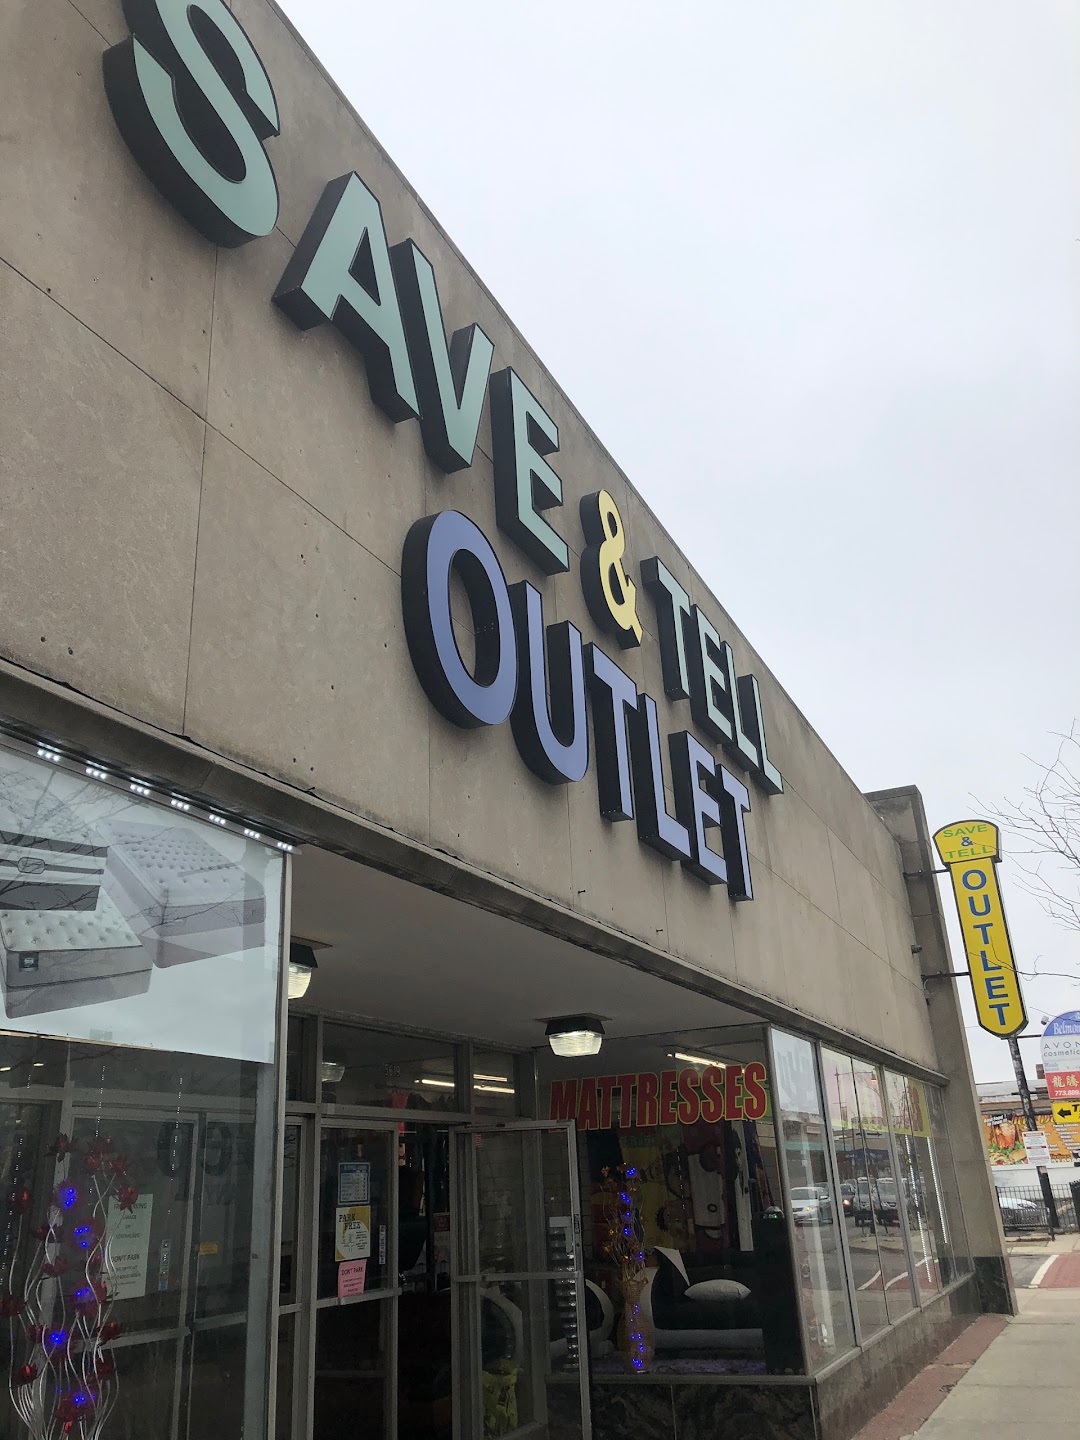 Save & Tell Outlet